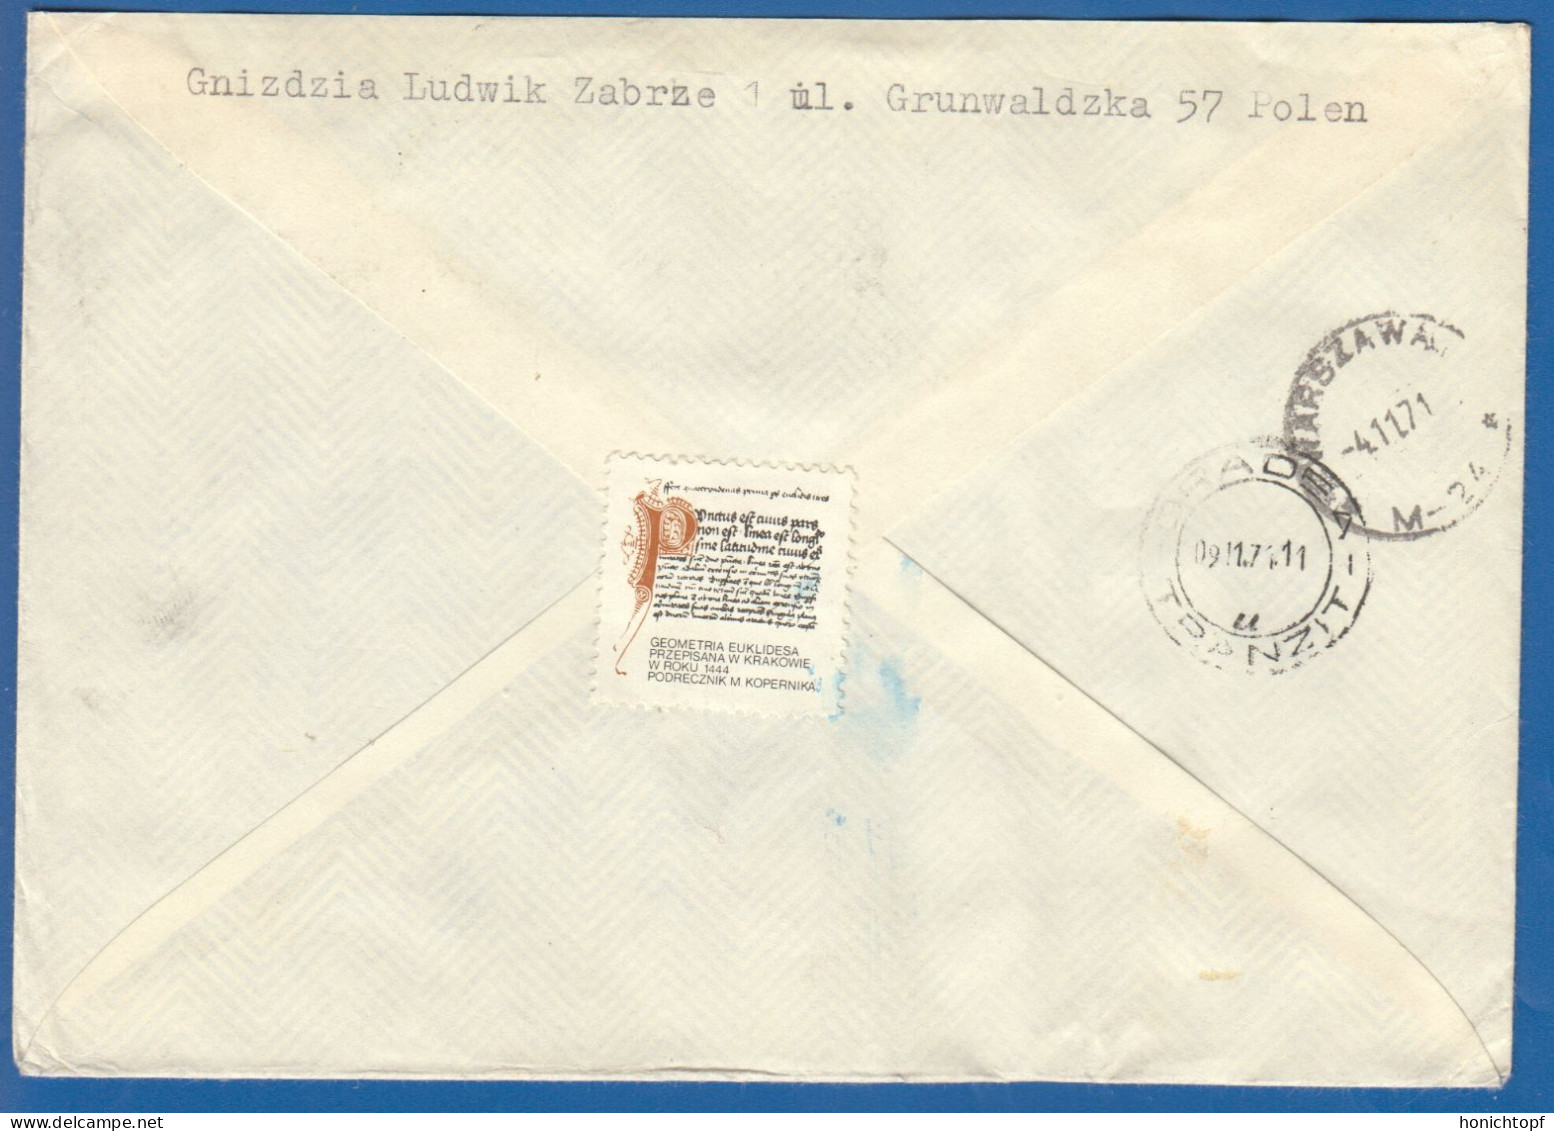 Polen; Registered Cover Gliwice 2; 1971 - Lettres & Documents